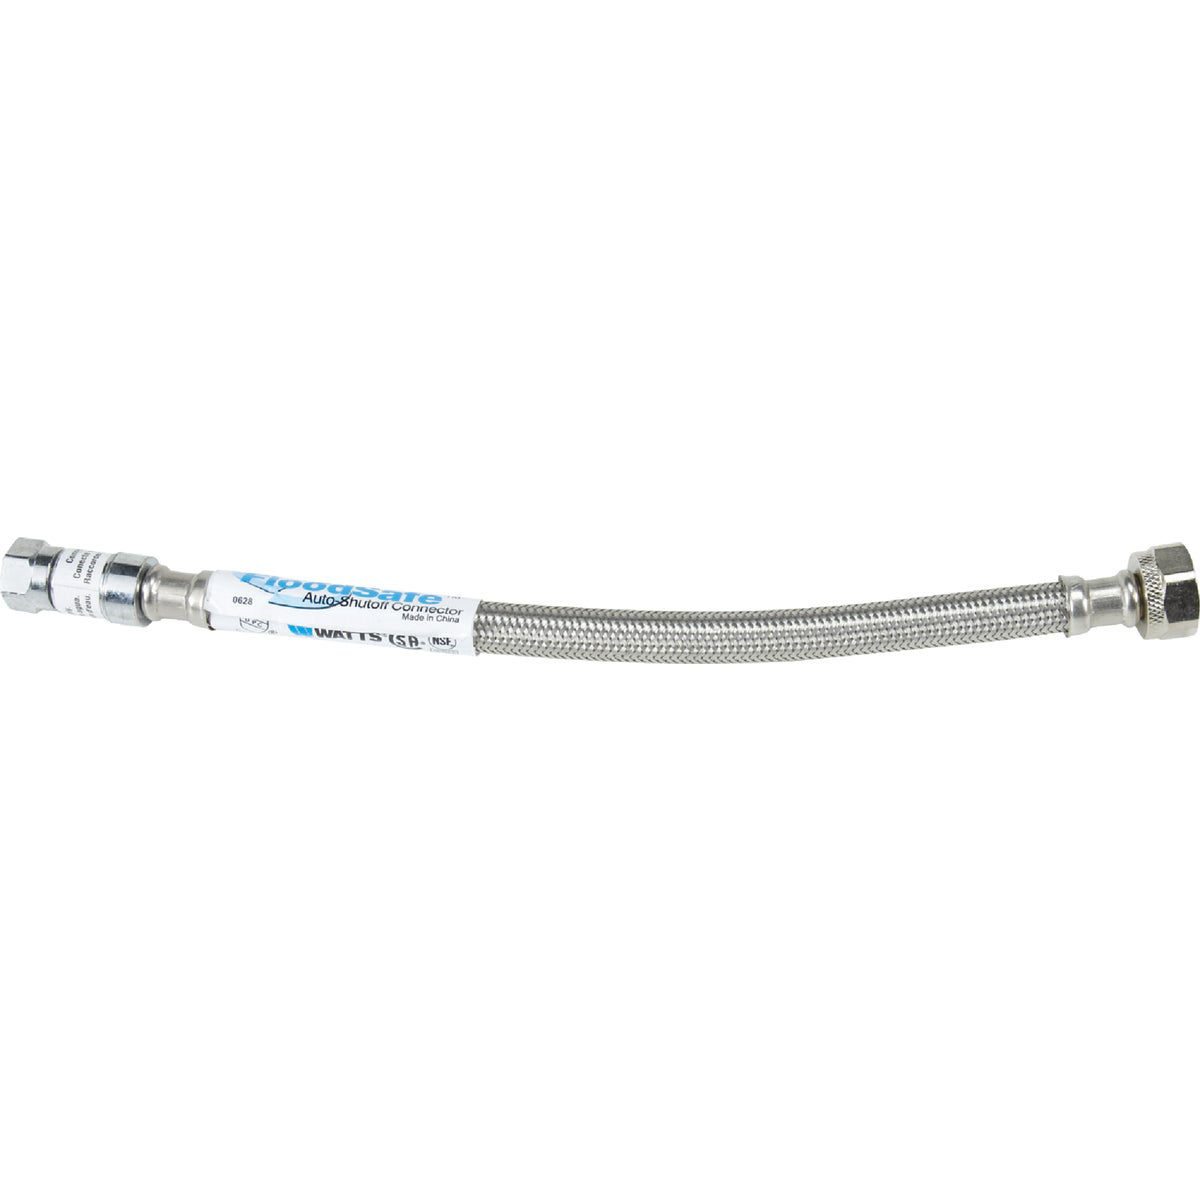 3/8-in COMP x 3/8-in KC x 12-in Braided Stainless Steel Faucet Supply Line